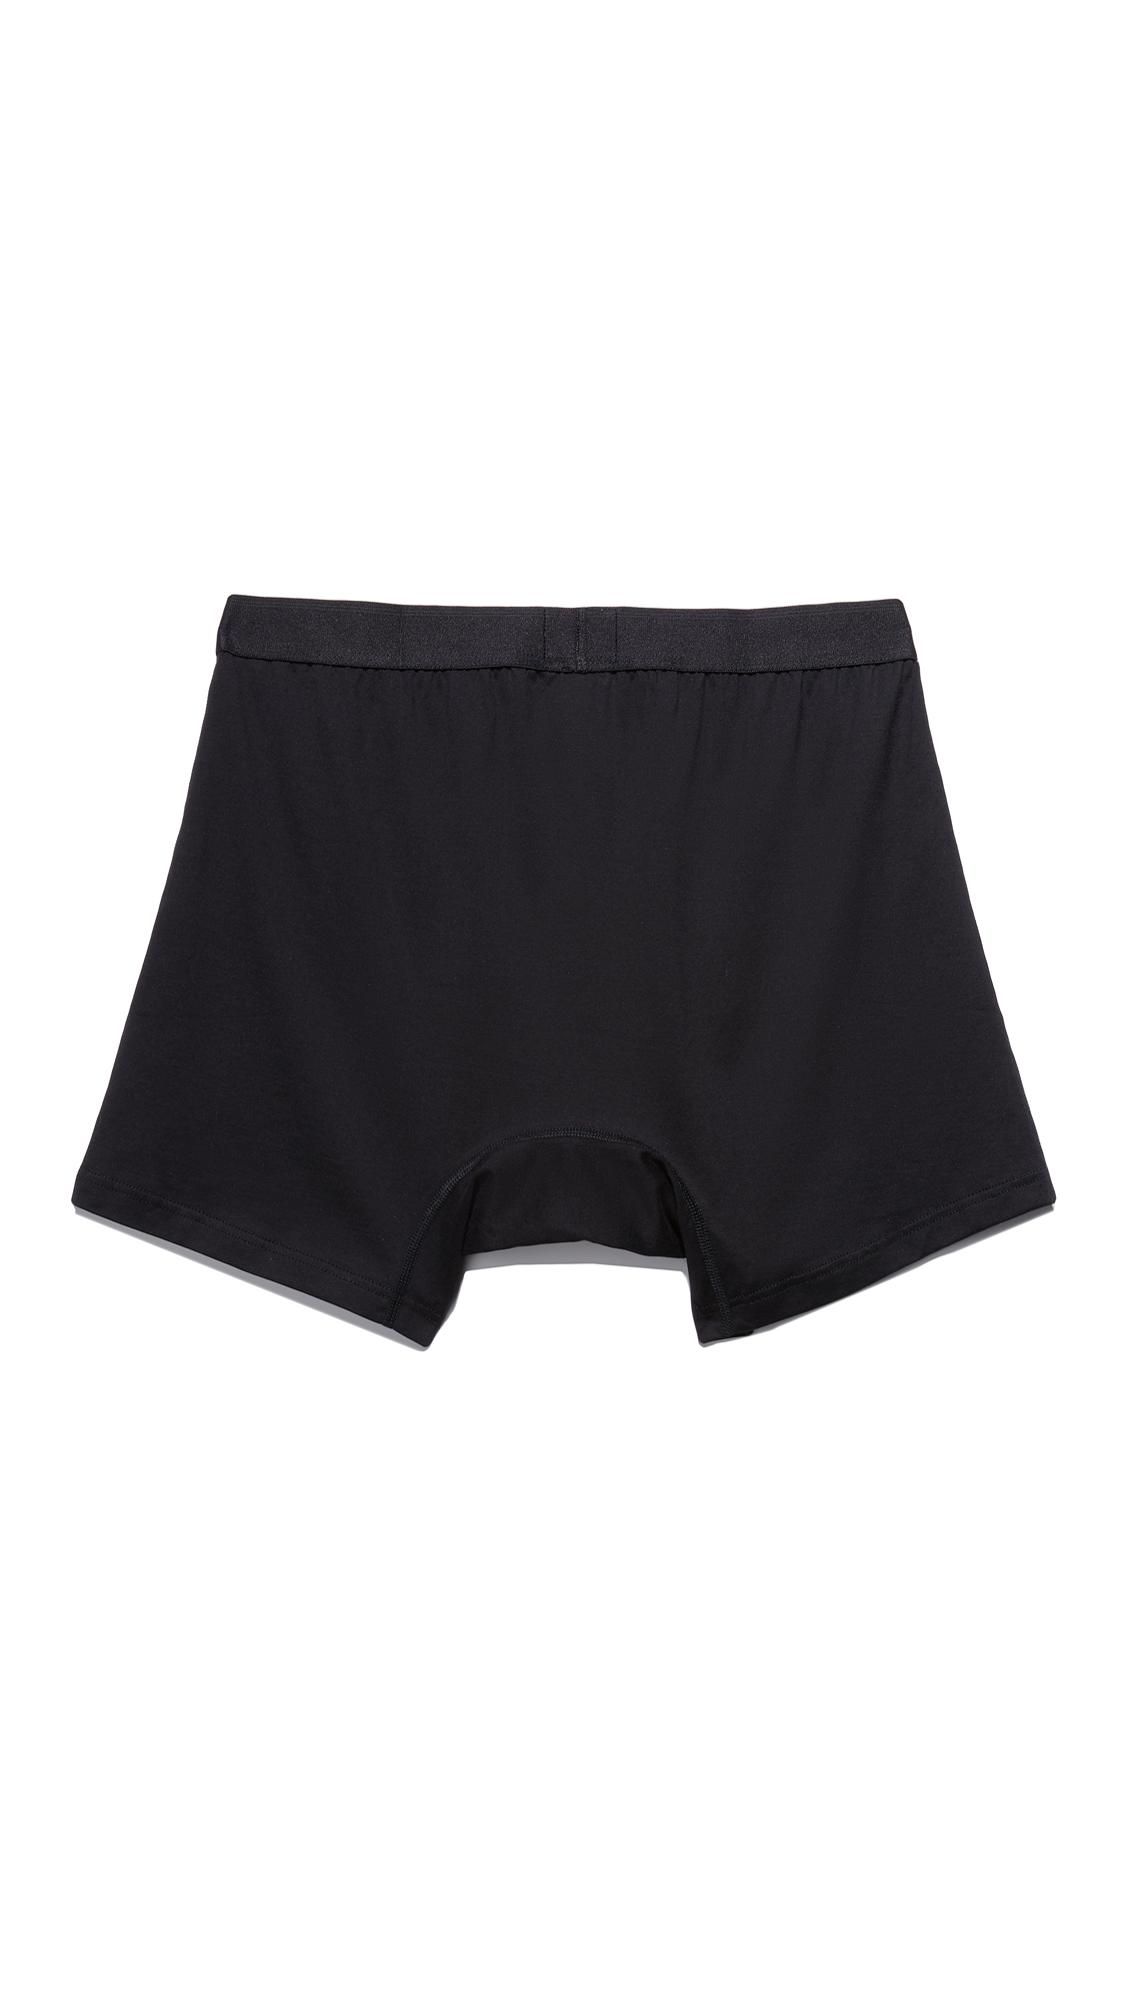 Sunspel Q82 Two Button Boxer Shorts In Black | ModeSens